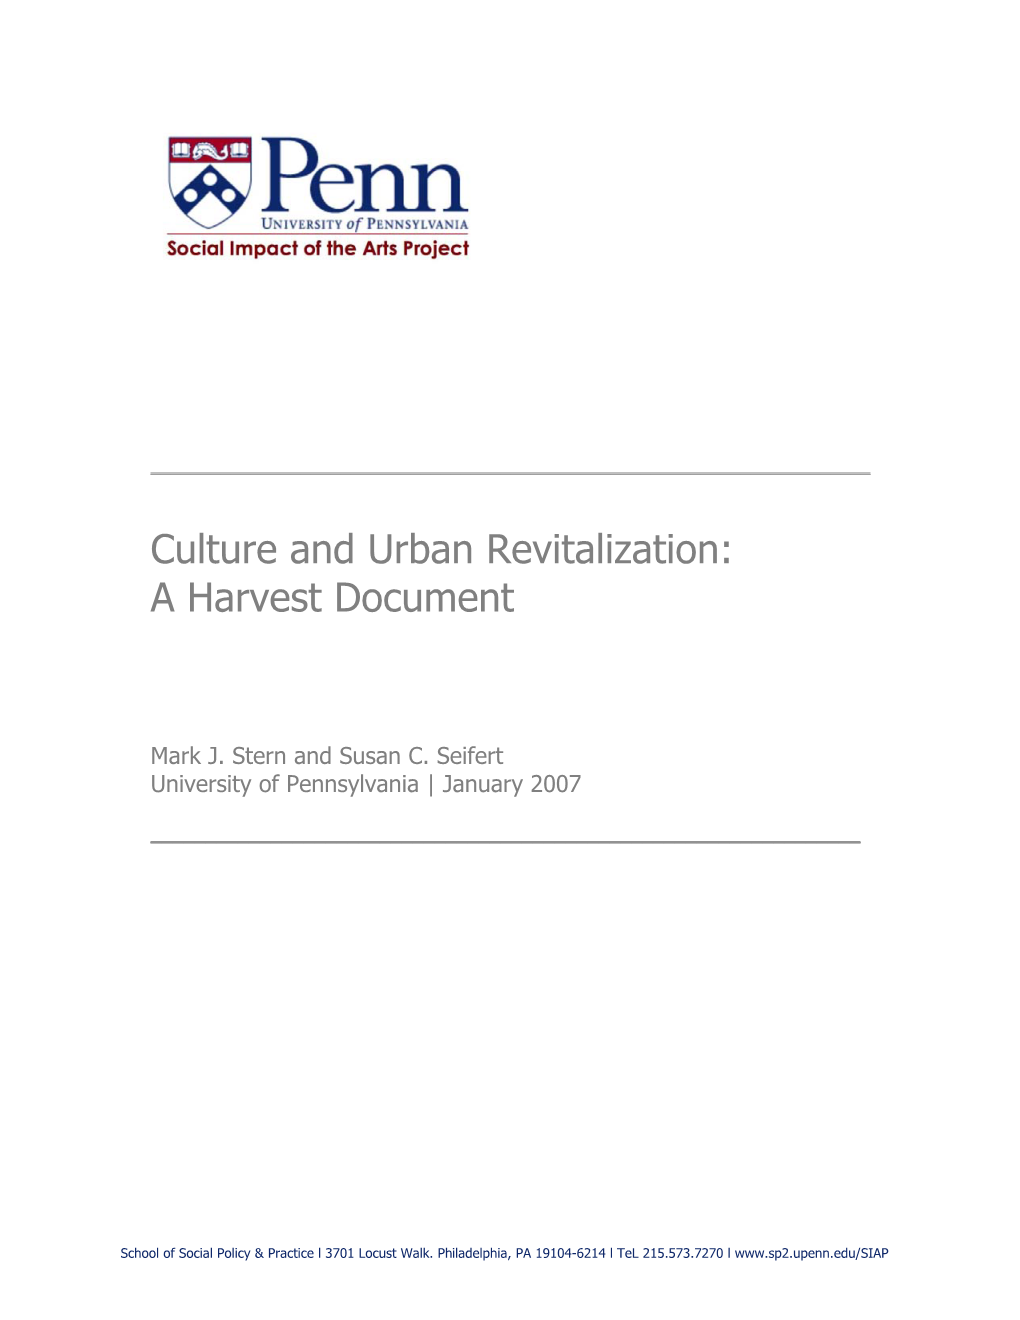 Culture and Urban Revitalization: a Harvest Document